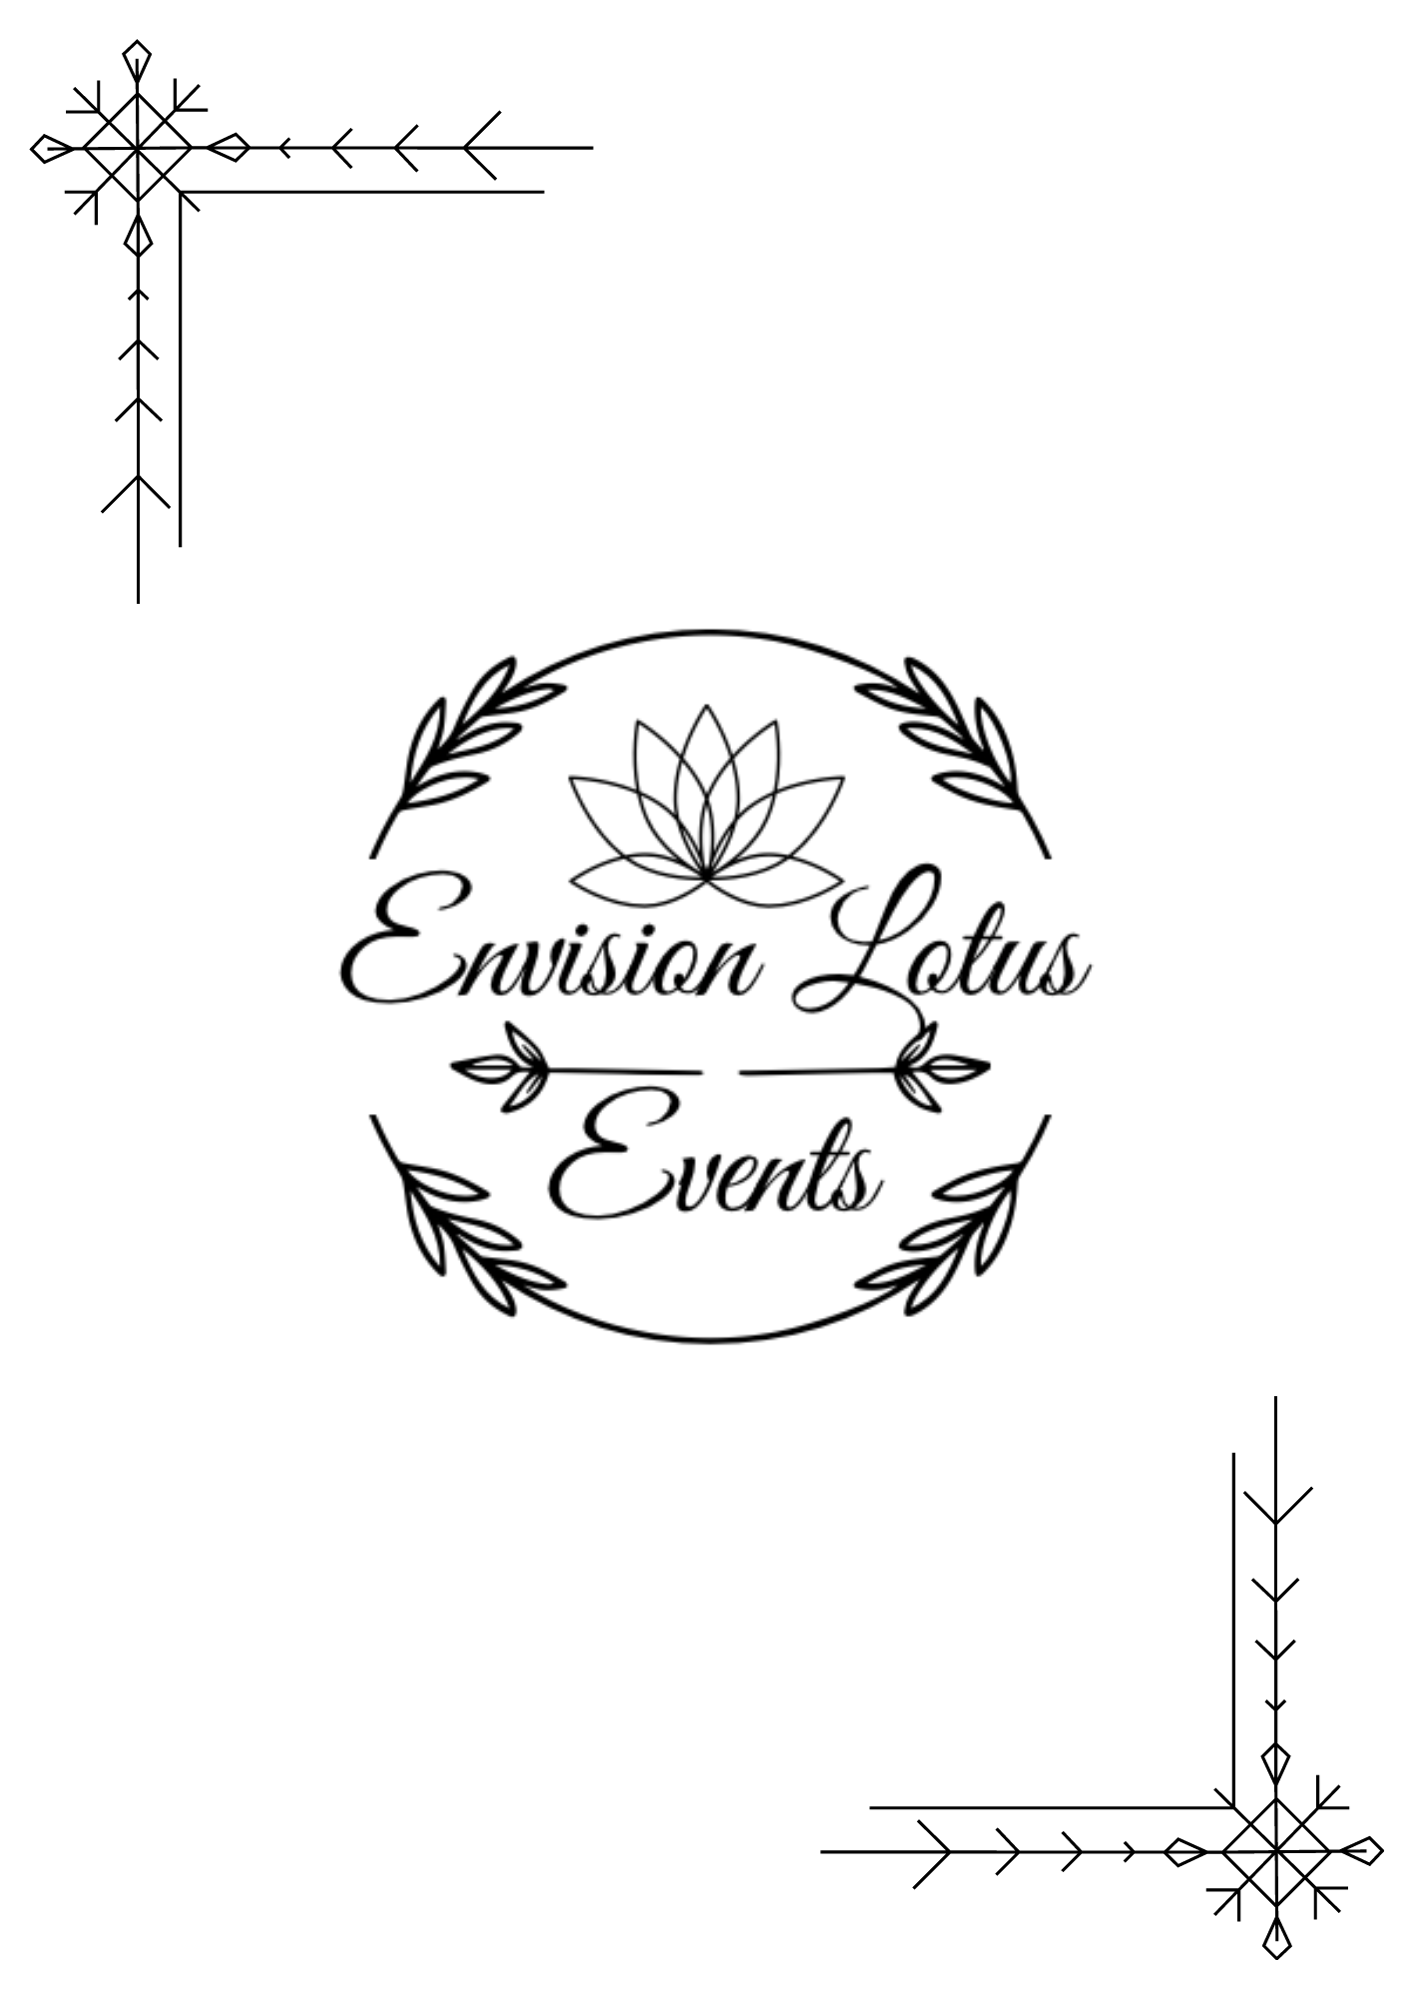 Envision Lotus Events